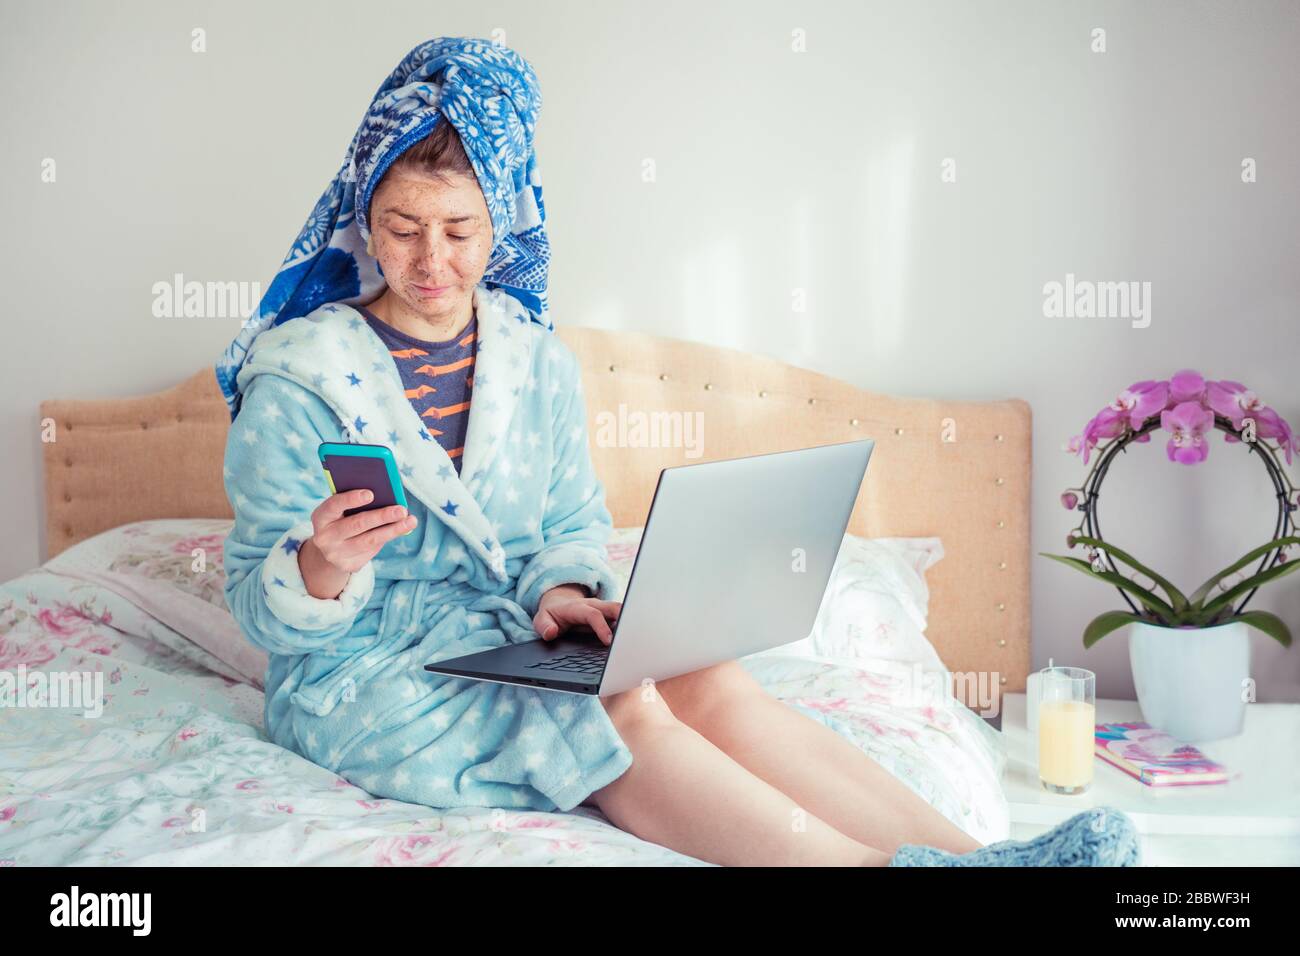 Portrait of a woman in a bathrobe and with a towel on her head, applying a scrubbing mask on her face while using smart phone and laptop, sitting on t Stock Photo